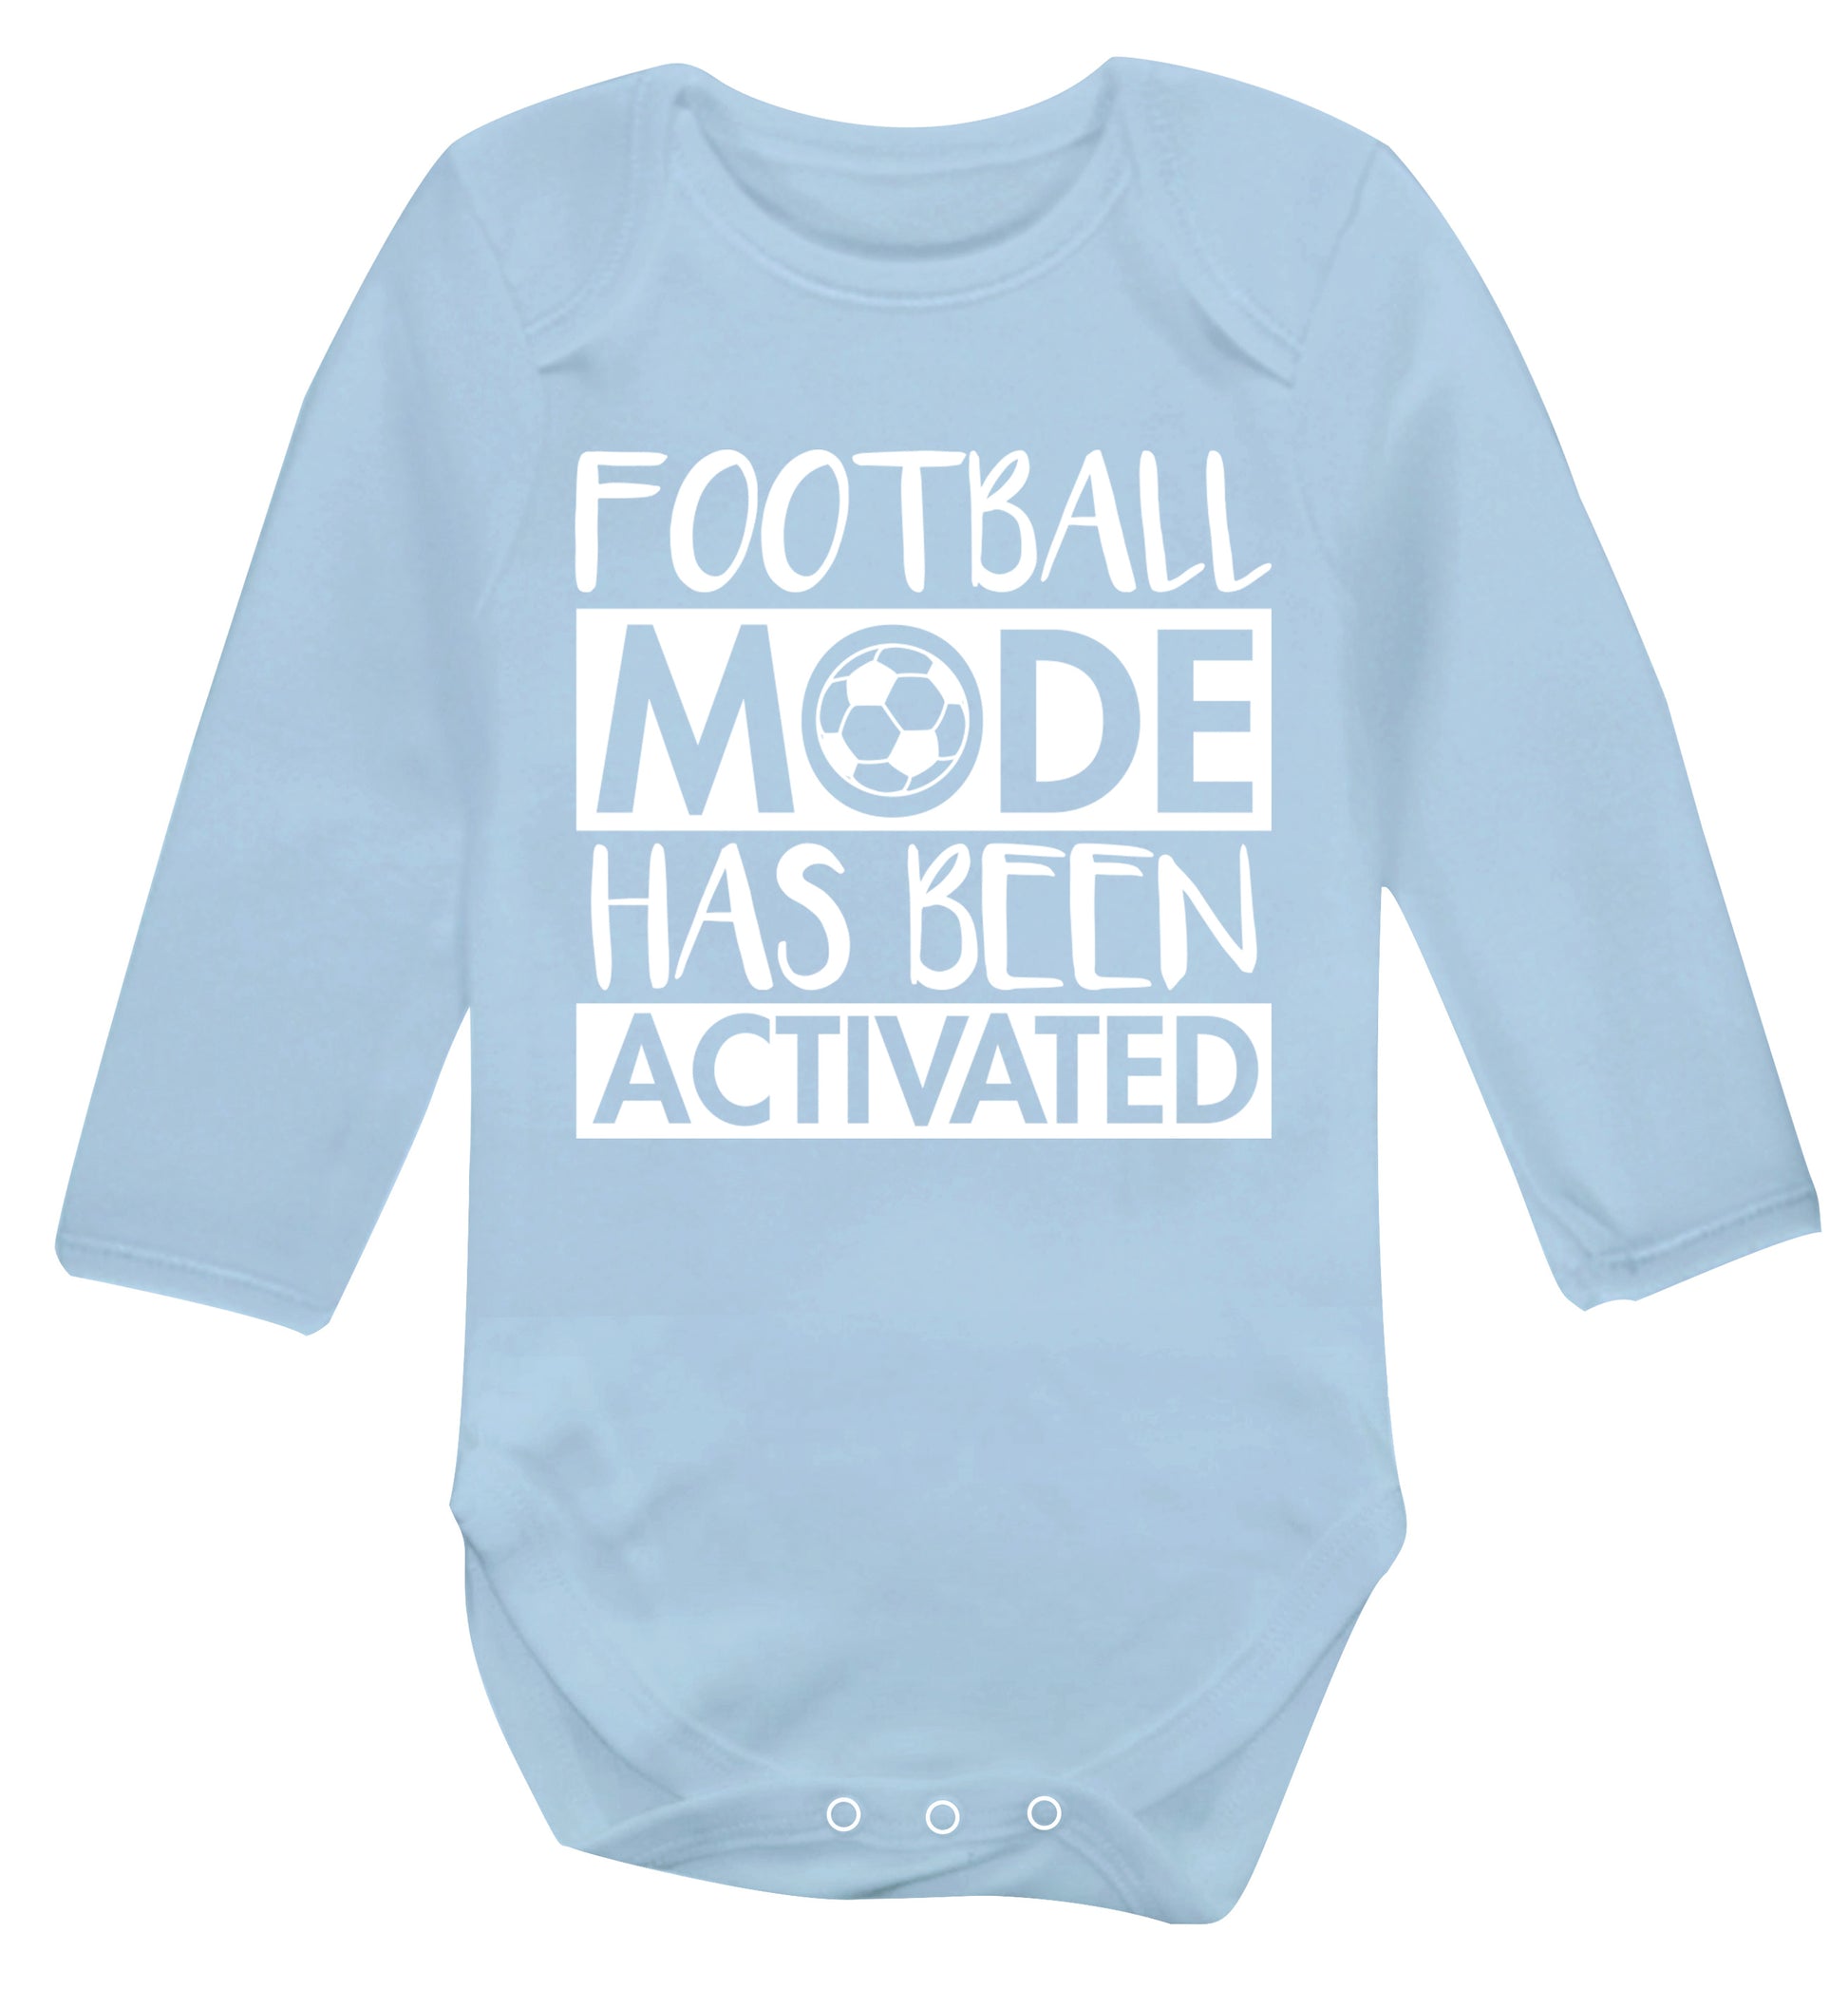 Football mode has been activated Baby Vest long sleeved pale blue 6-12 months